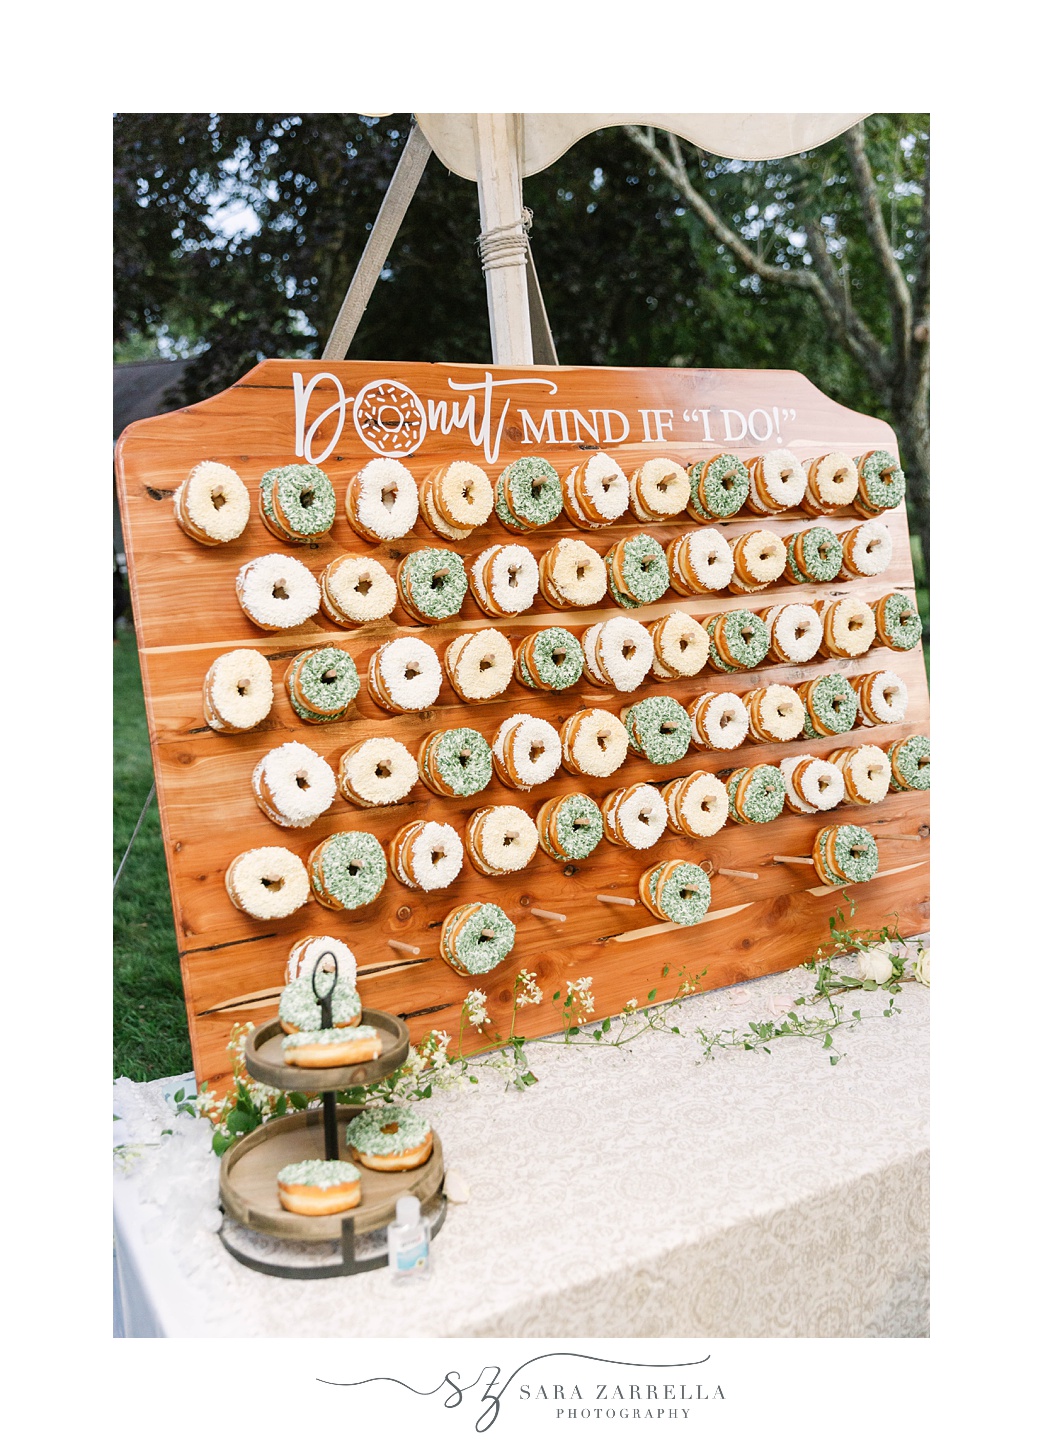 donut wall during whimsical garden wedding reception under tent